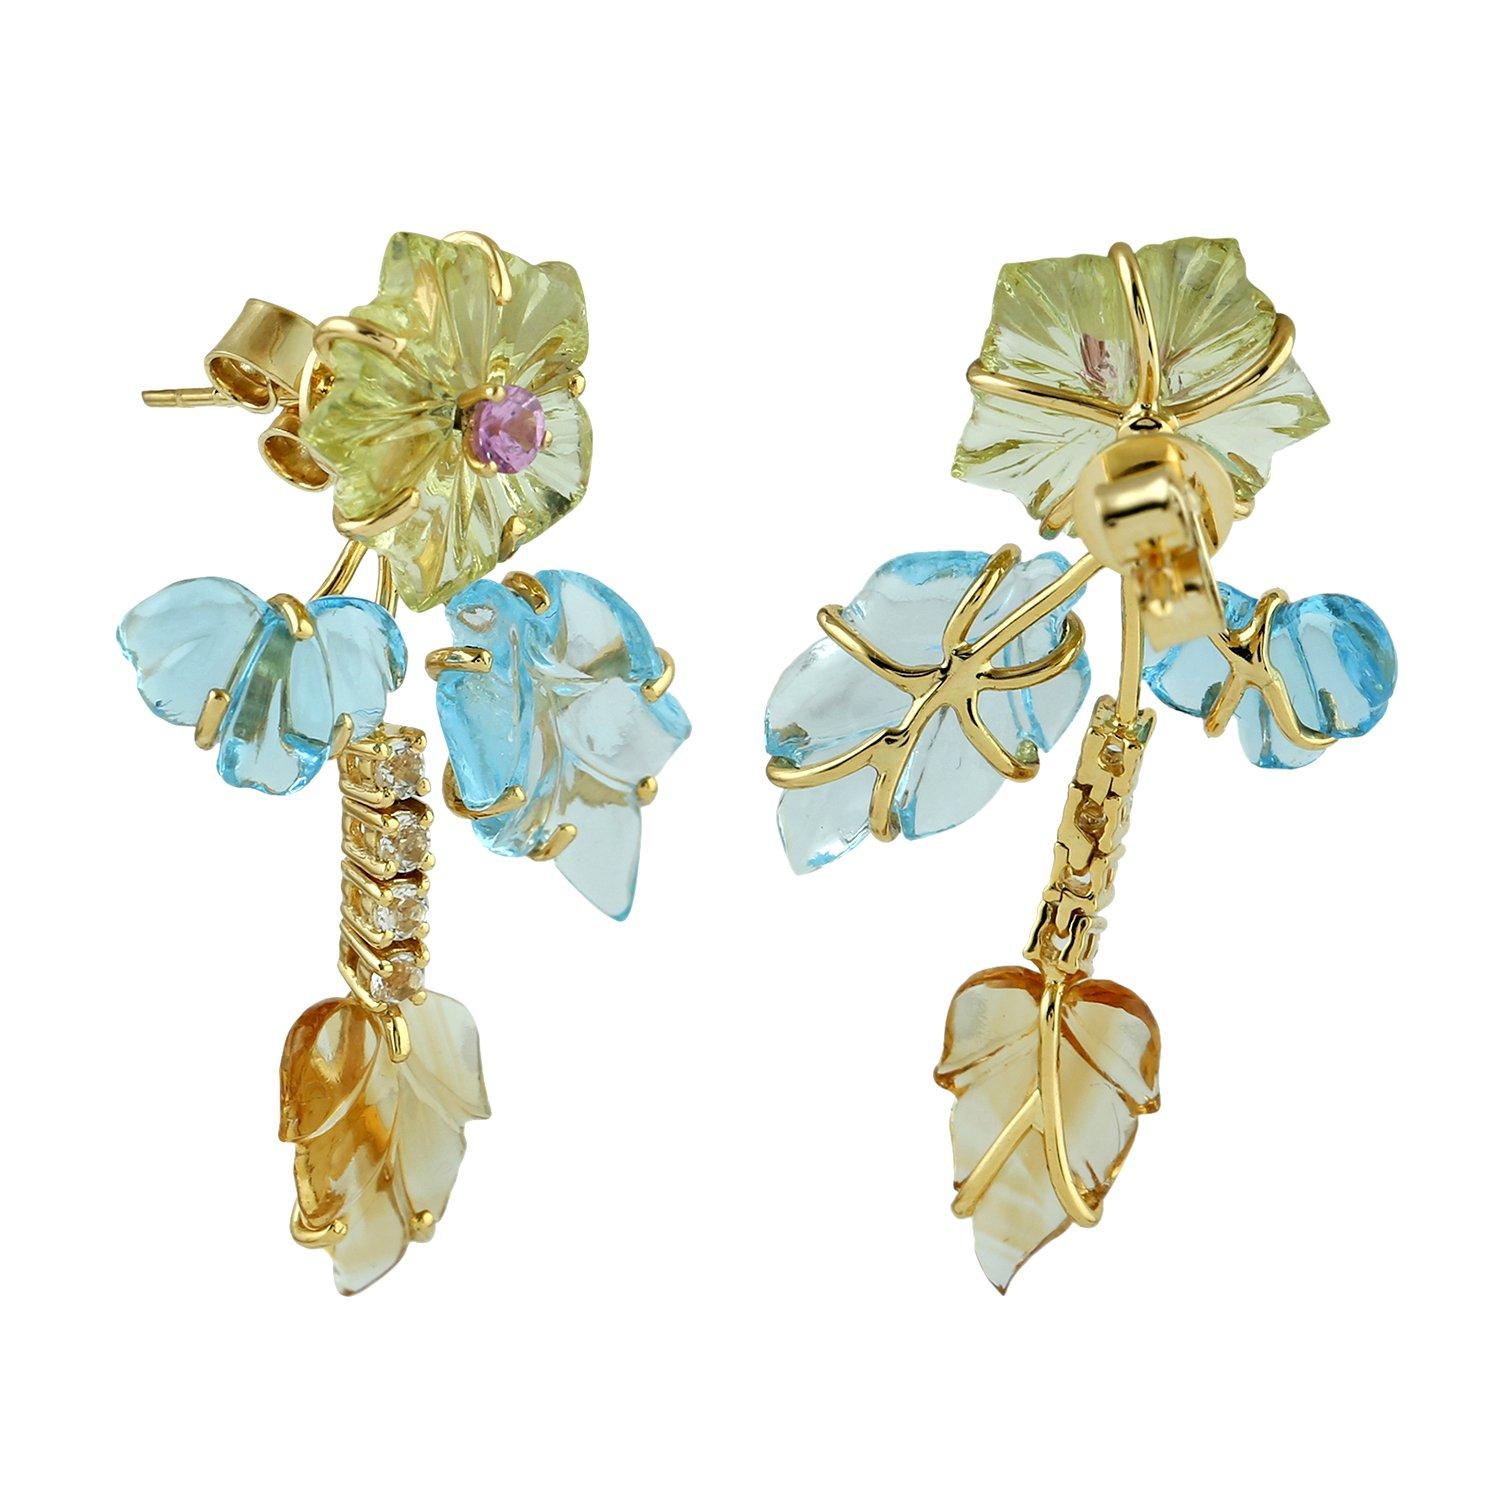 Cast in 18-karat gold. These beautiful earrings are set with 10.72 carats hand carved citrine, topaz and .29 carats sapphire.  See other flower collection matching pieces.

FOLLOW  MEGHNA JEWELS storefront to view the latest collection & exclusive